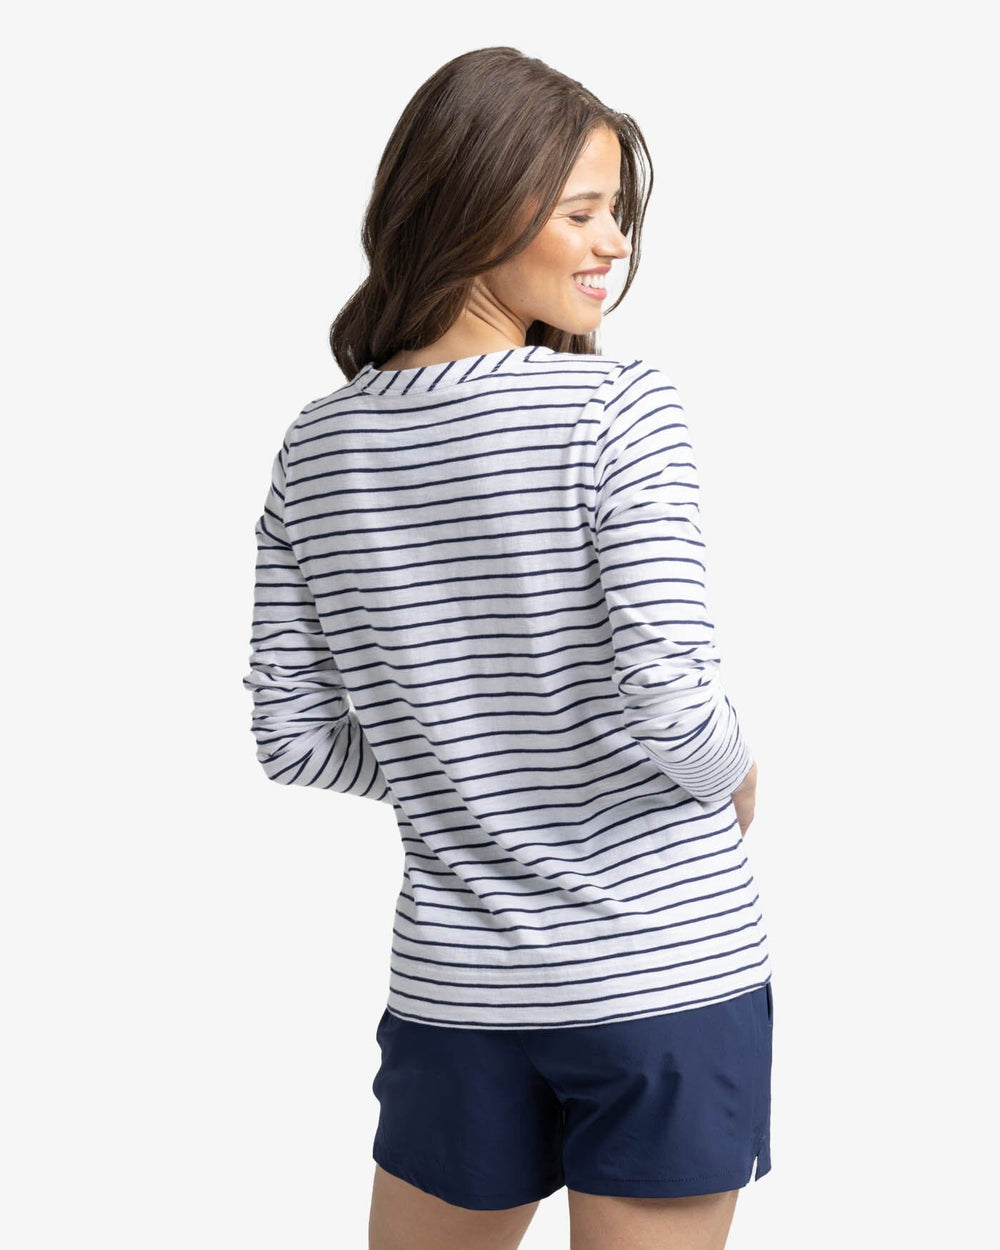 The back view of the Southern Tide Kimmy Stripe Crew Neck Long Sleeve T-Shirt by Southern Tide - Nautical Navy